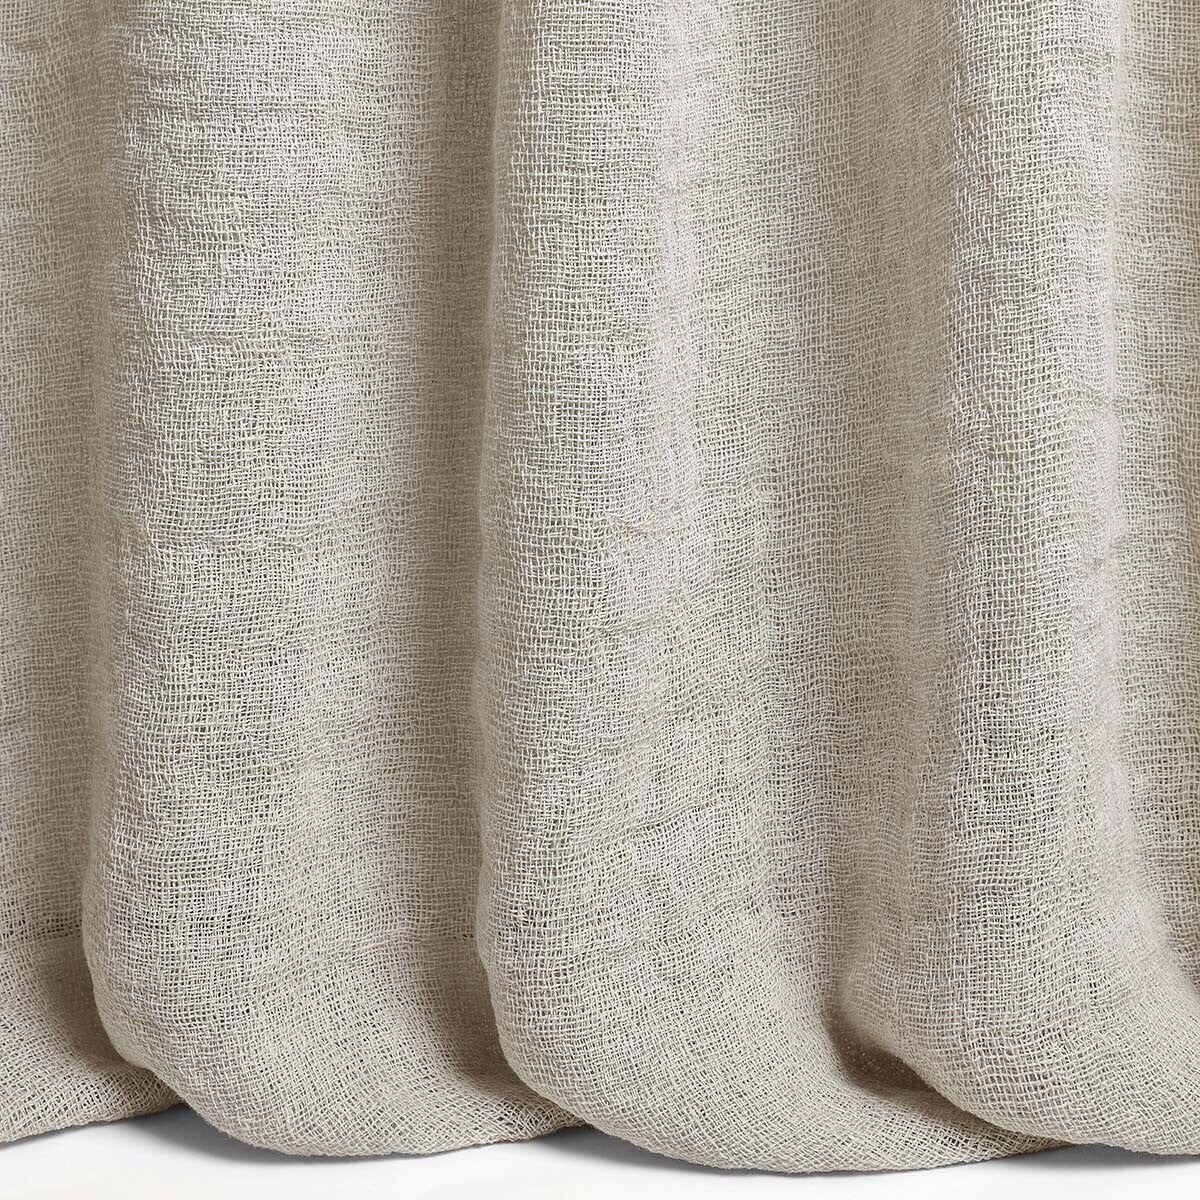 Allegro fabric in 6 color - pattern LZ-30404.06.0 - by Kravet Couture in the Lizzo collection